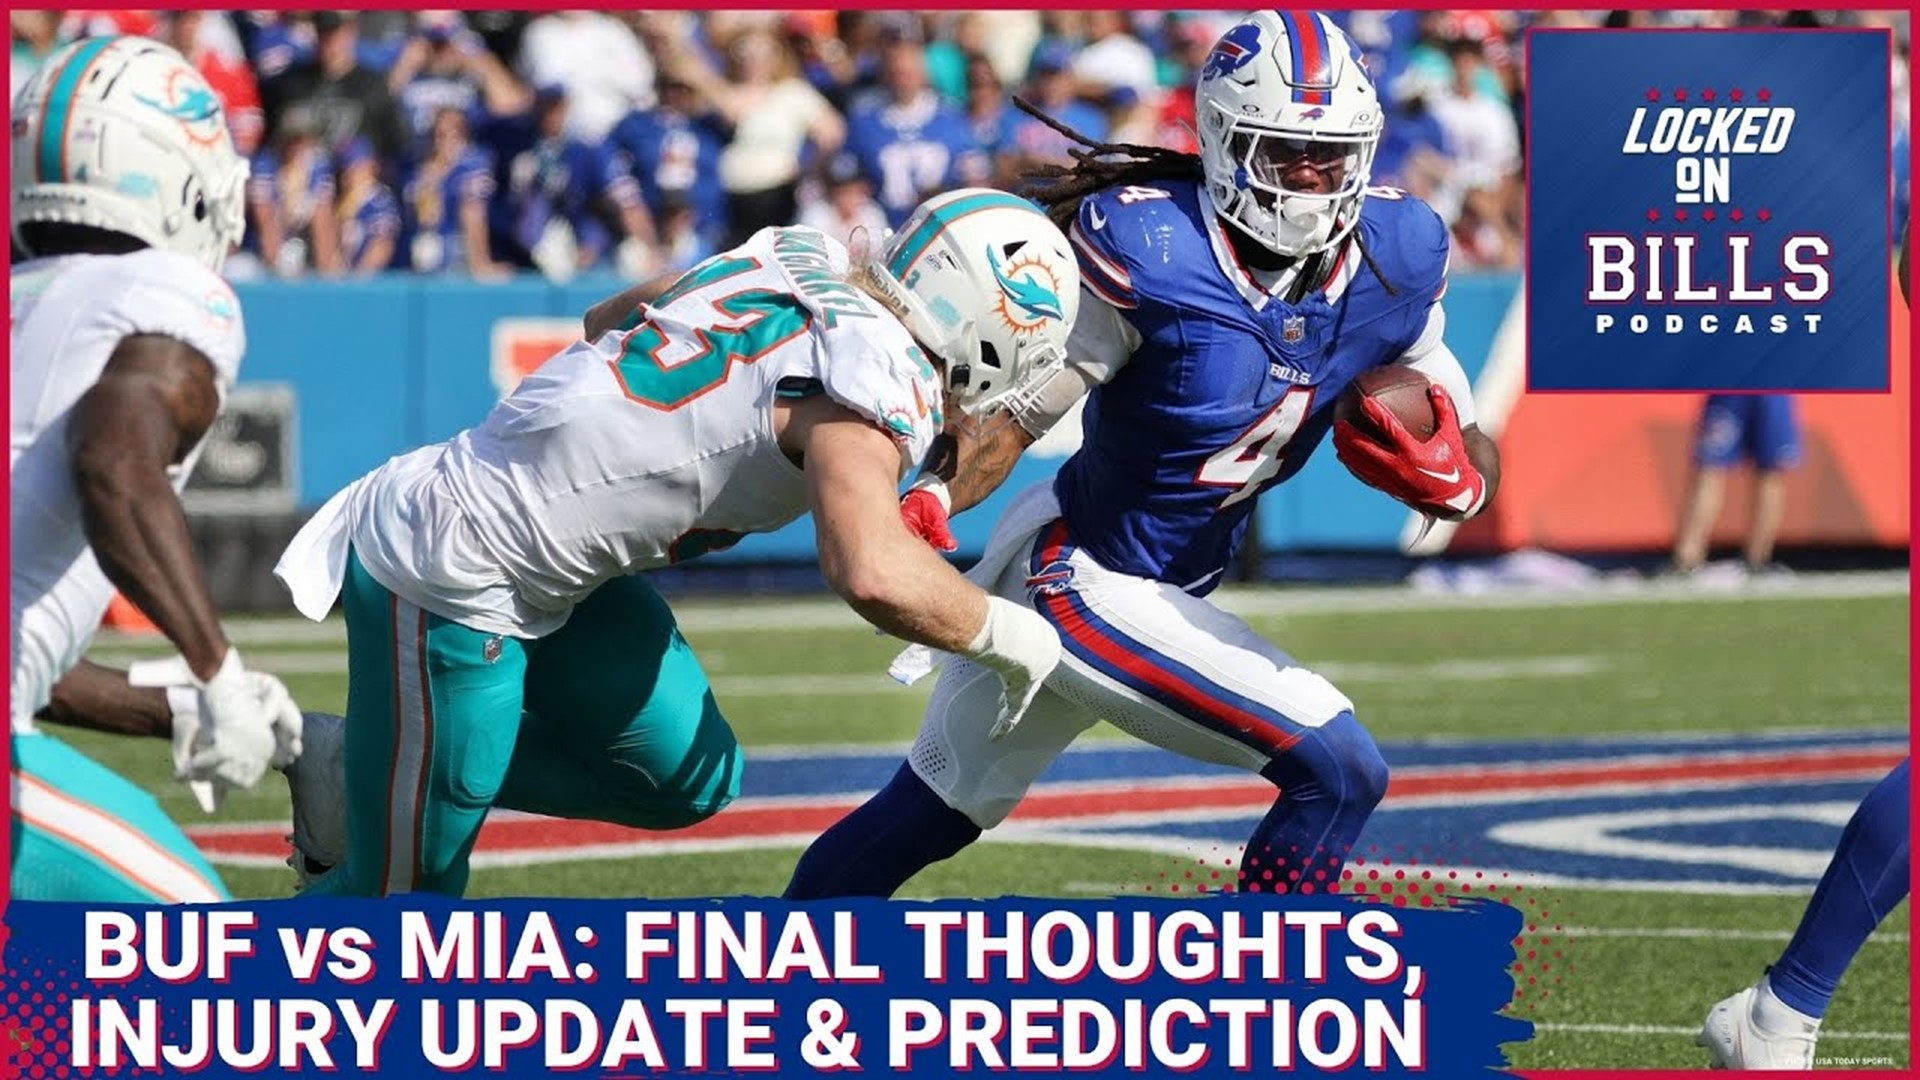 Buffalo Bills vs Miami Dolphins. Injury Update and Final Prediction for